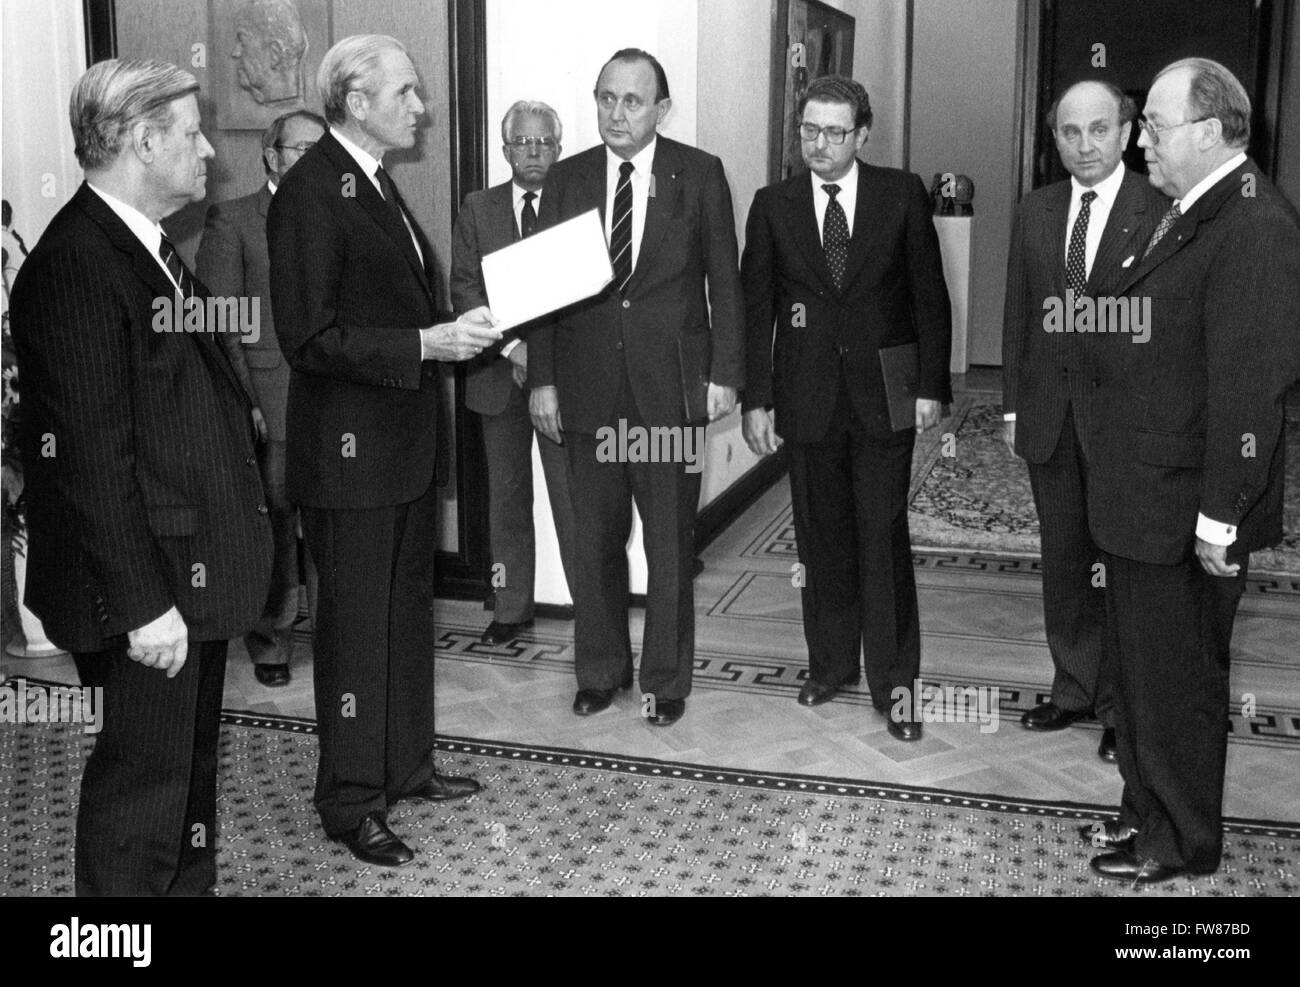 German president Karl Carstens (2nd of left) hands over the certificates of discharge to the withdrawn FDP ministers (r-l) Josef Ertl, Otto Graf Lambsdorff, Gerhart Baum and Hans-Dietrich Genscher in German chancellor Helmut Schmidt's (l) attendance. The FDP ministers' withdrawal overthrew the SPD minority government. Stock Photo